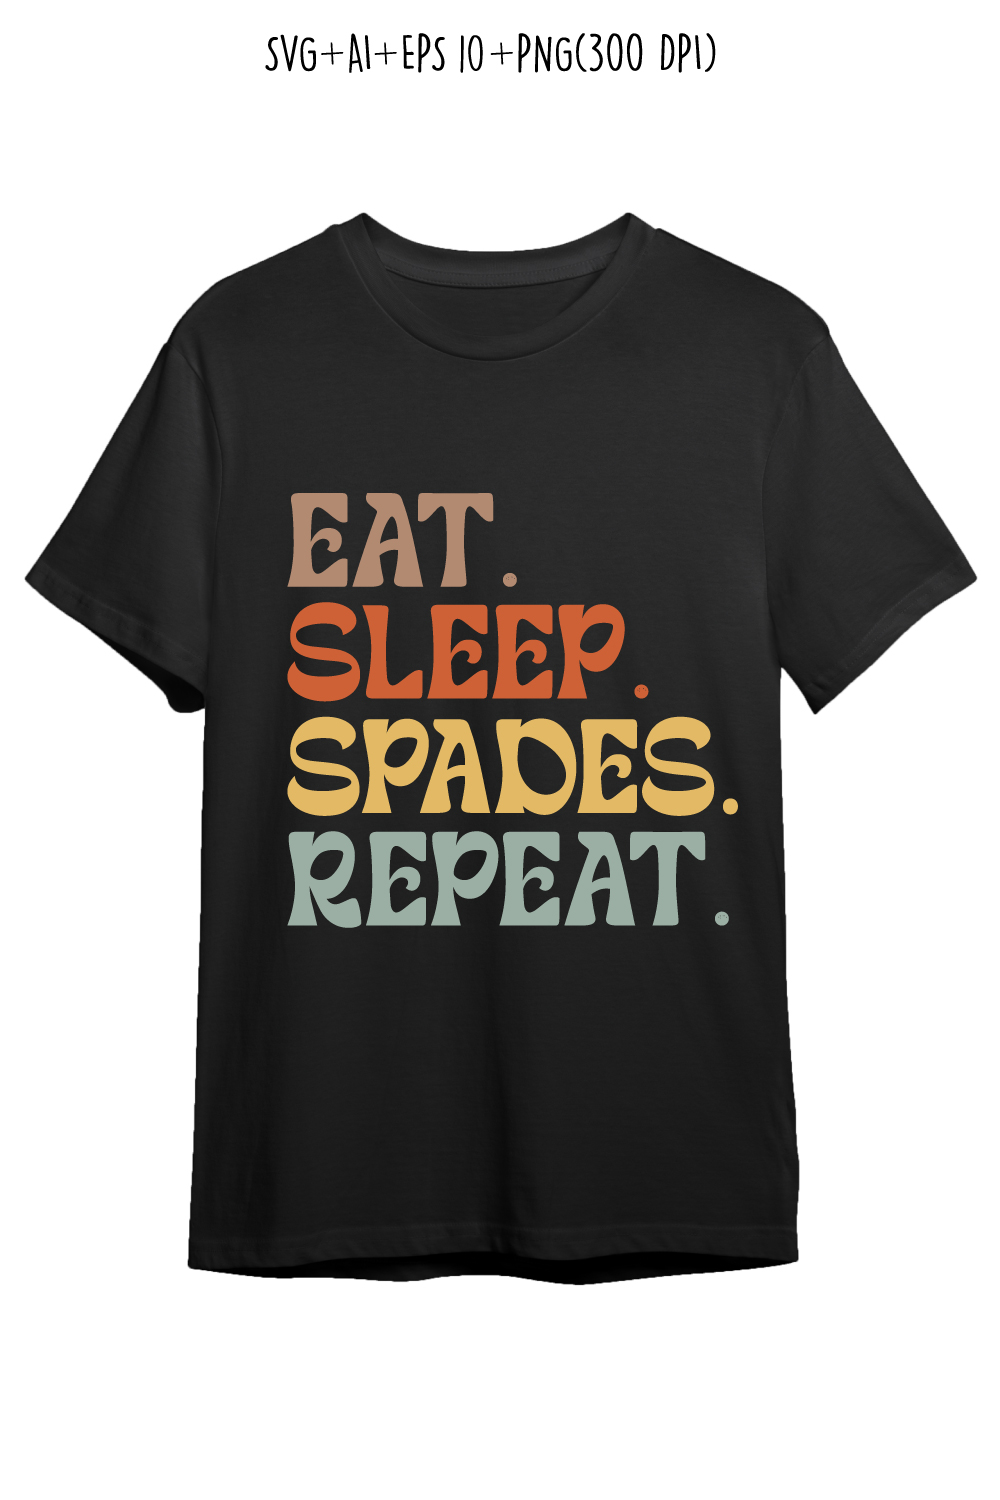 Eat Sleep Spades Repeat indoor game typography design for t-shirts, cards, frame artwork, phone cases, bags, mugs, stickers, tumblers, print, etc pinterest preview image.